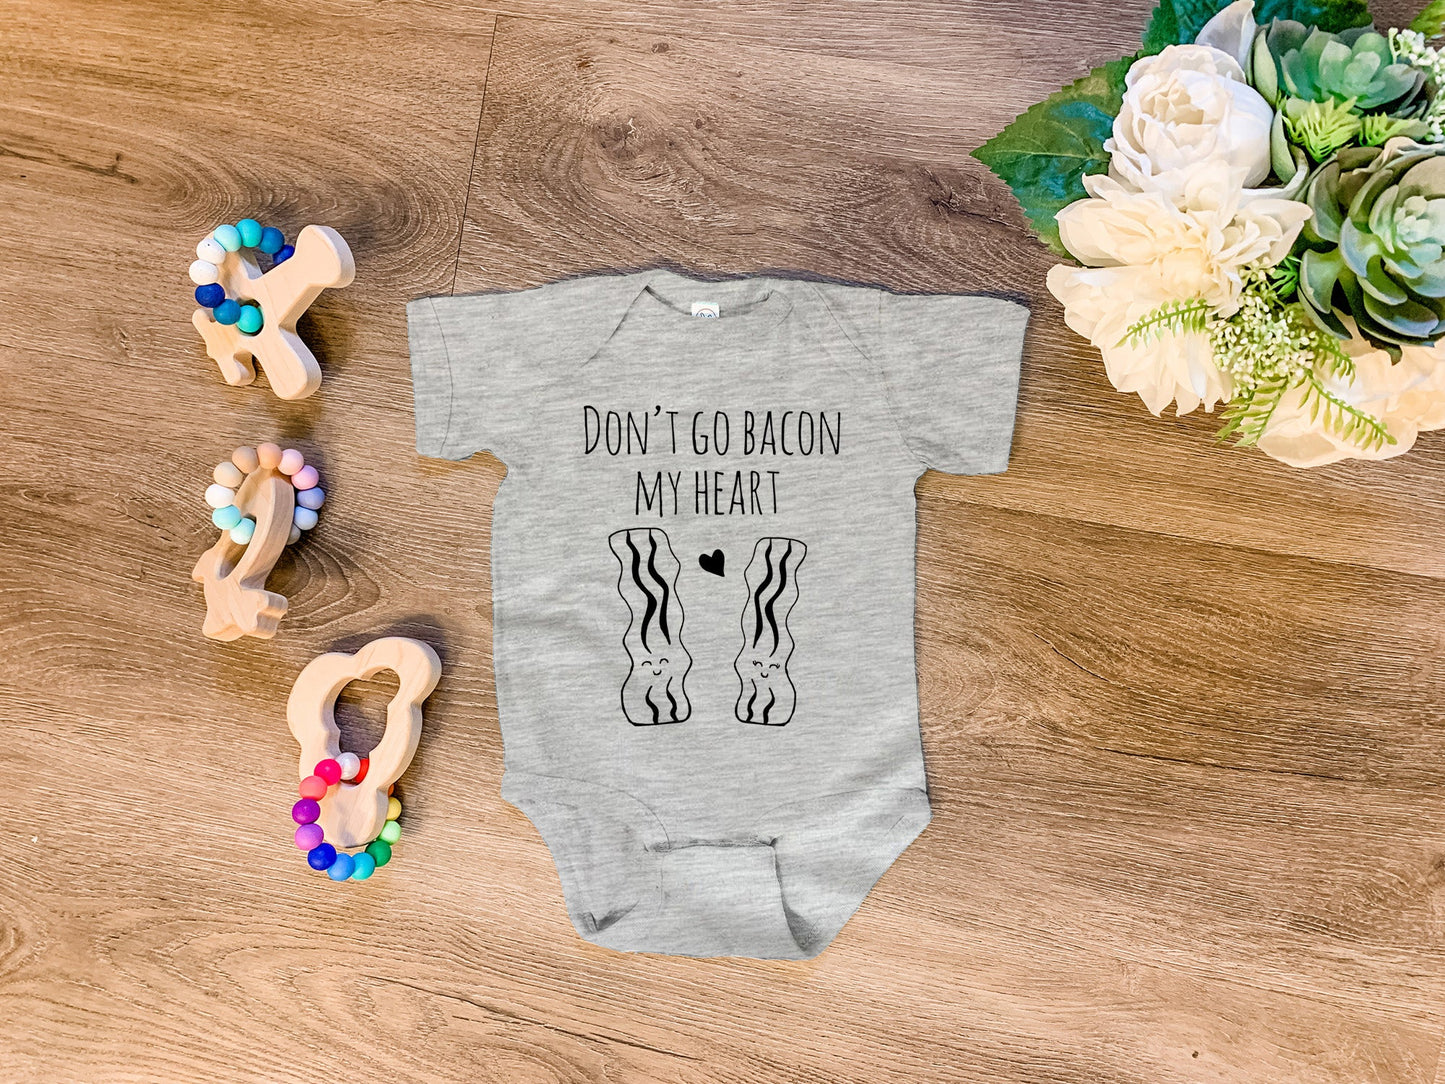 Don't Go Bacon My Heart - Onesie - Heather Gray, Chill, or Lavender